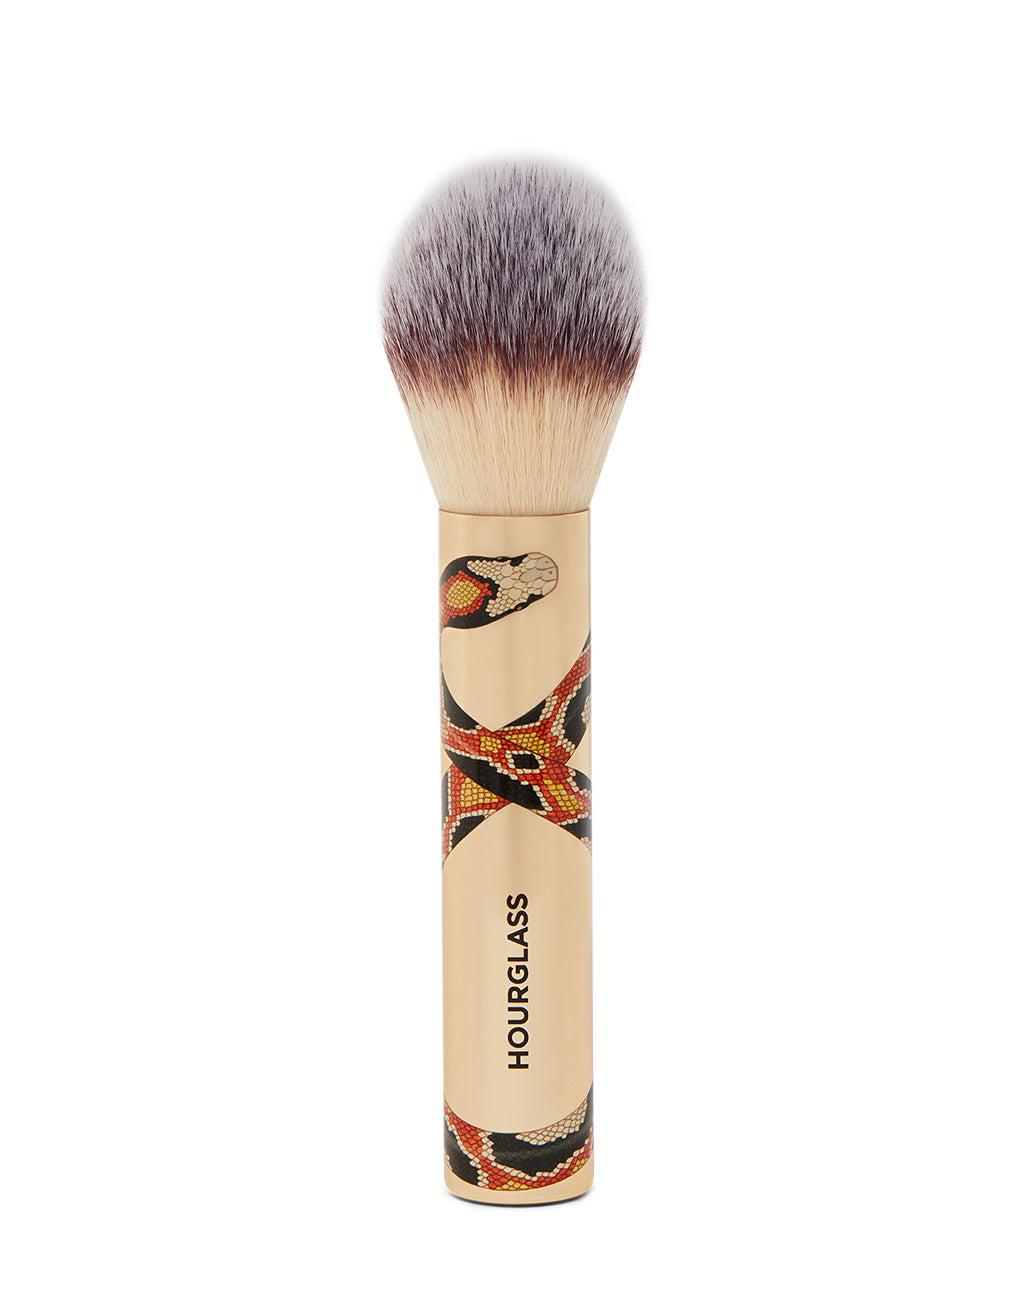 These Portable Makeup Brushes Are Must-Haves Even When You Aren't Traveling